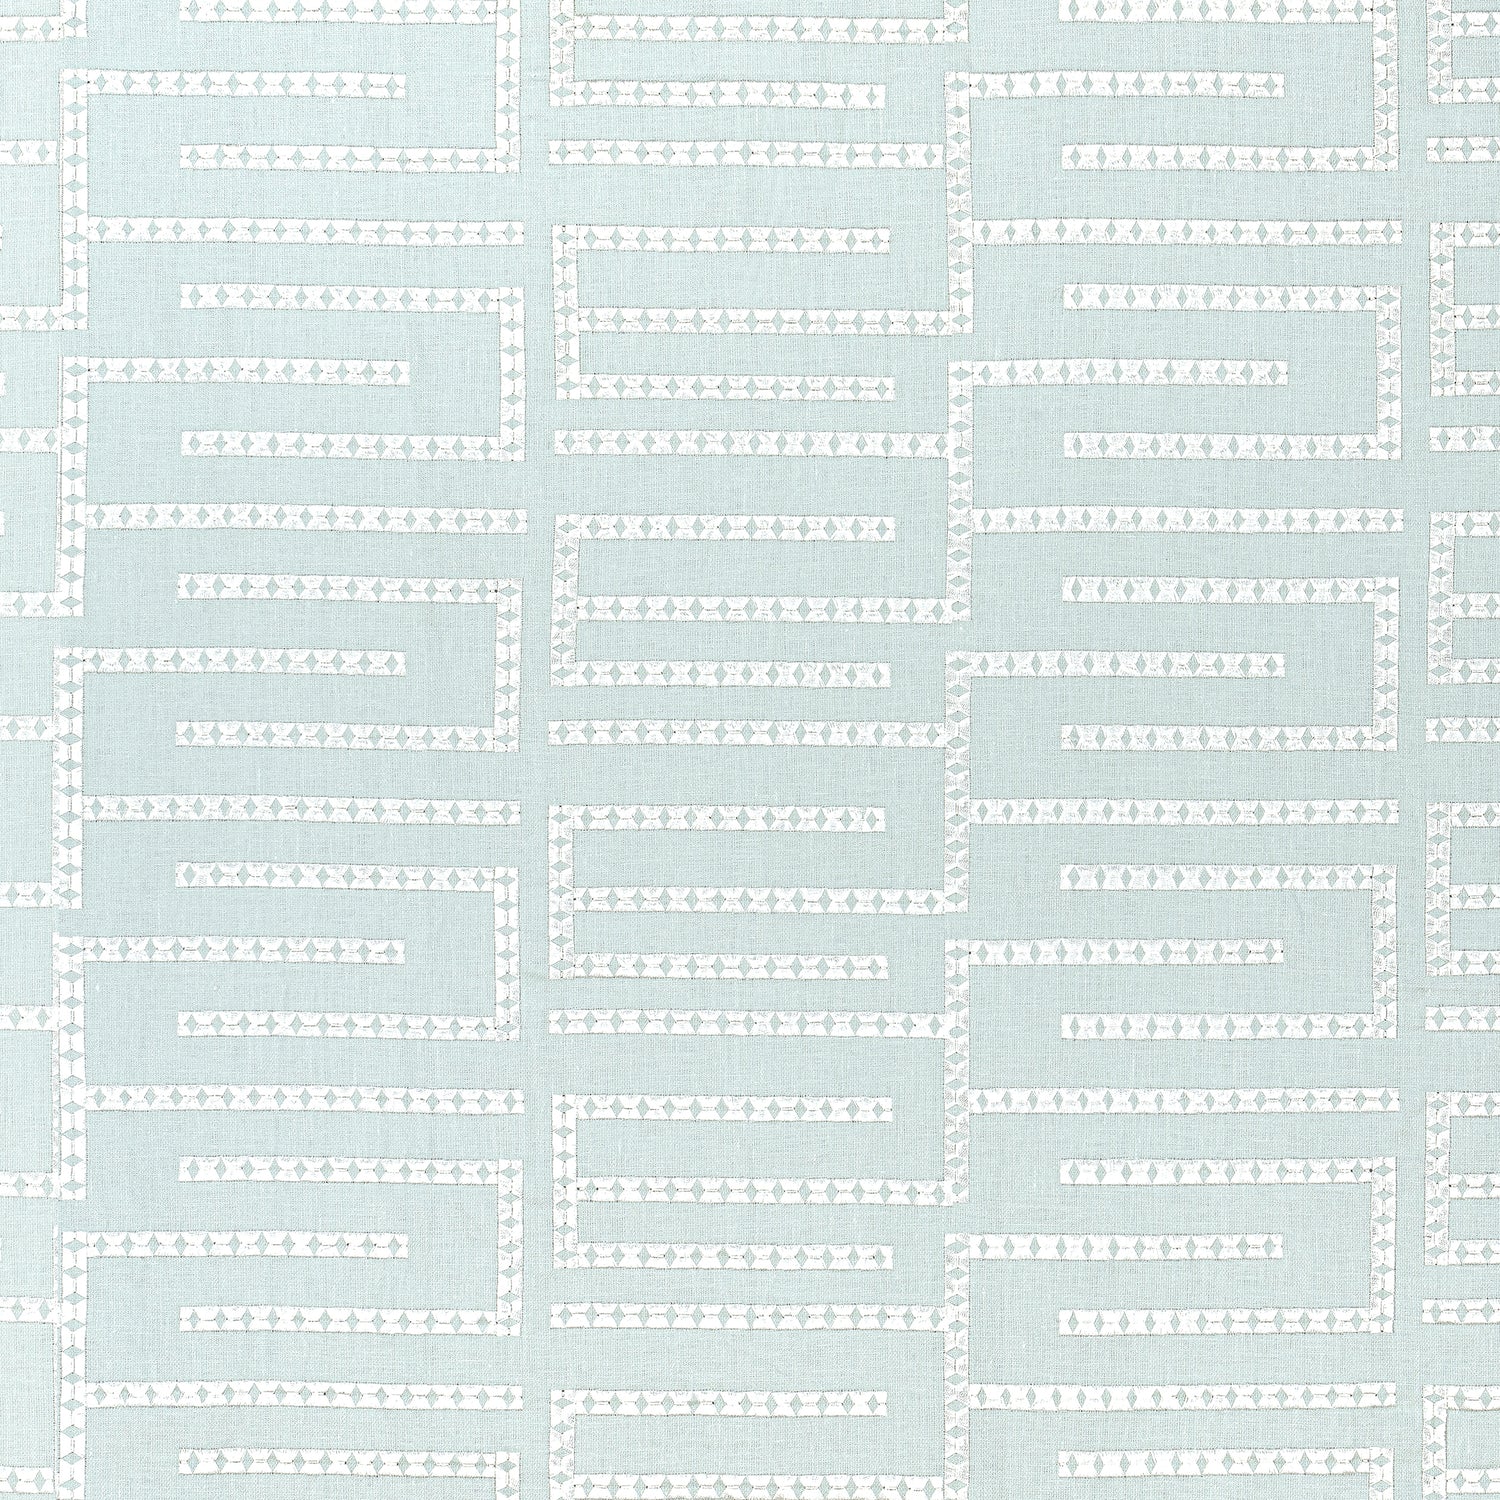 Architect Embroidery fabric in mist - pattern number W713629 - by Thibaut in the Grand Palace collection